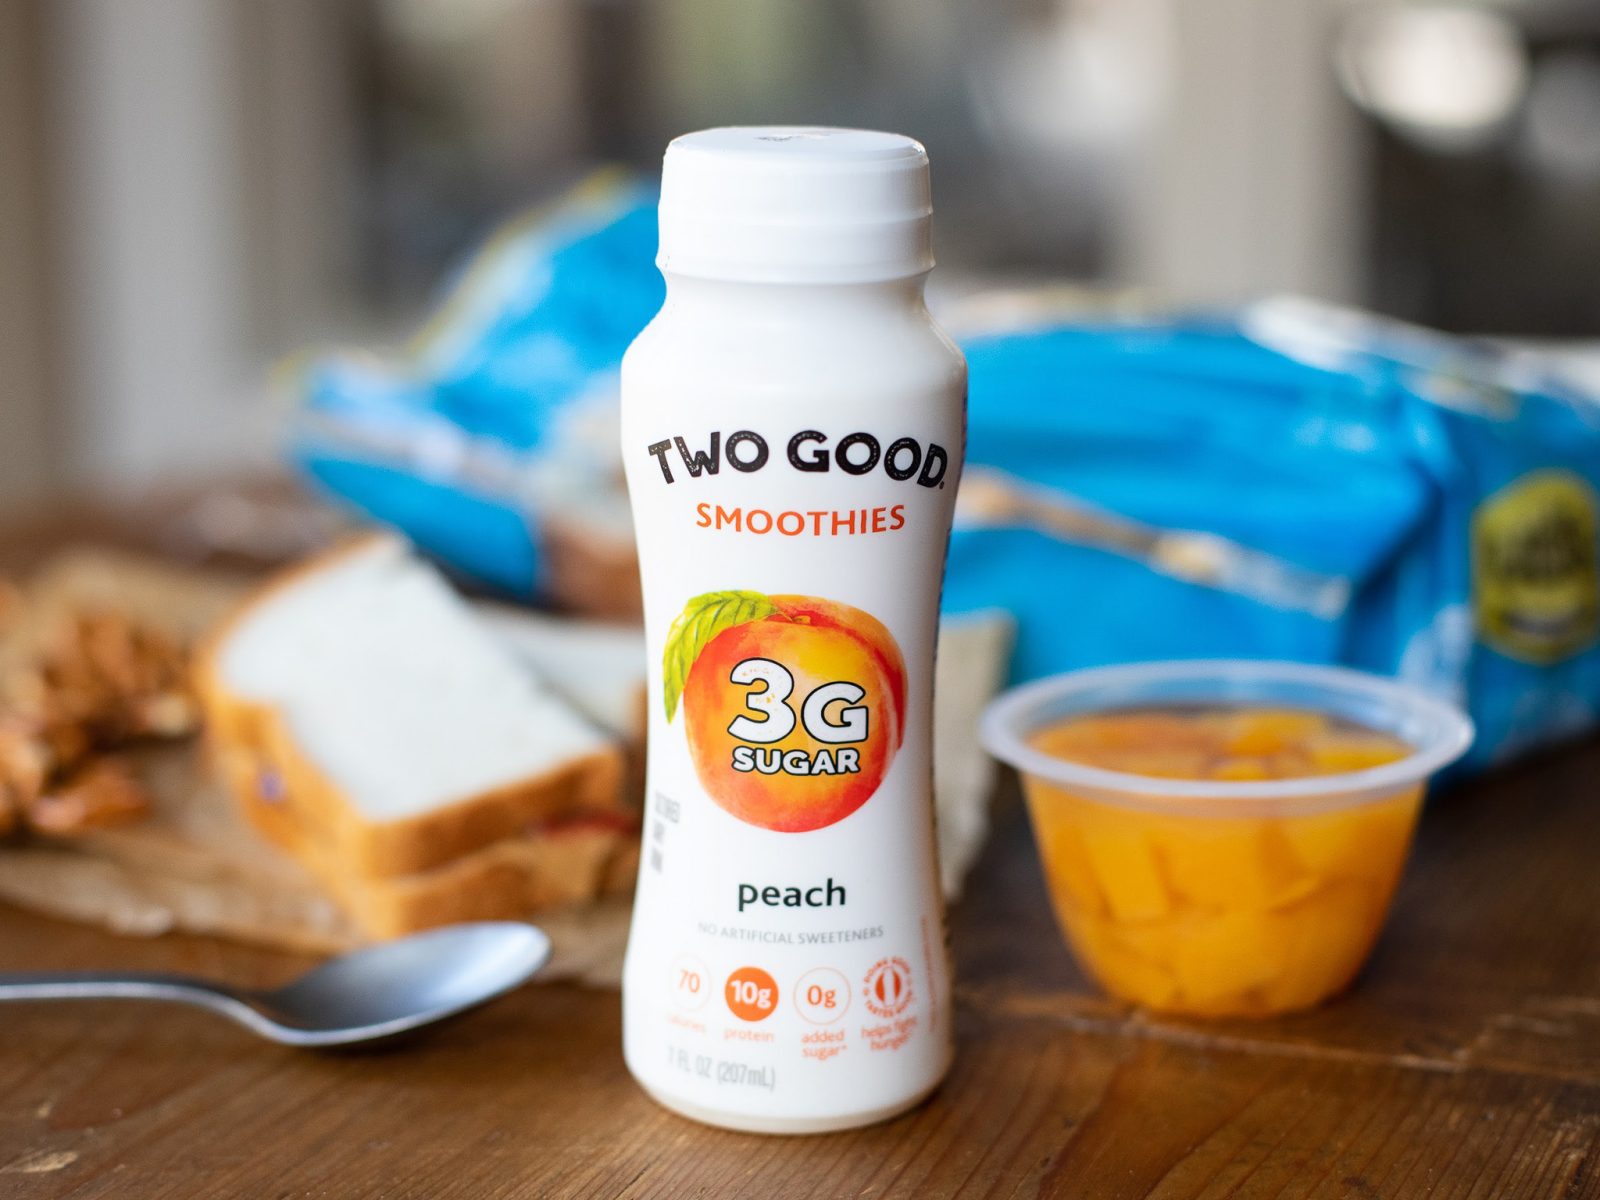 Get Two Good Smoothies For As Low As 89¢ At Kroger